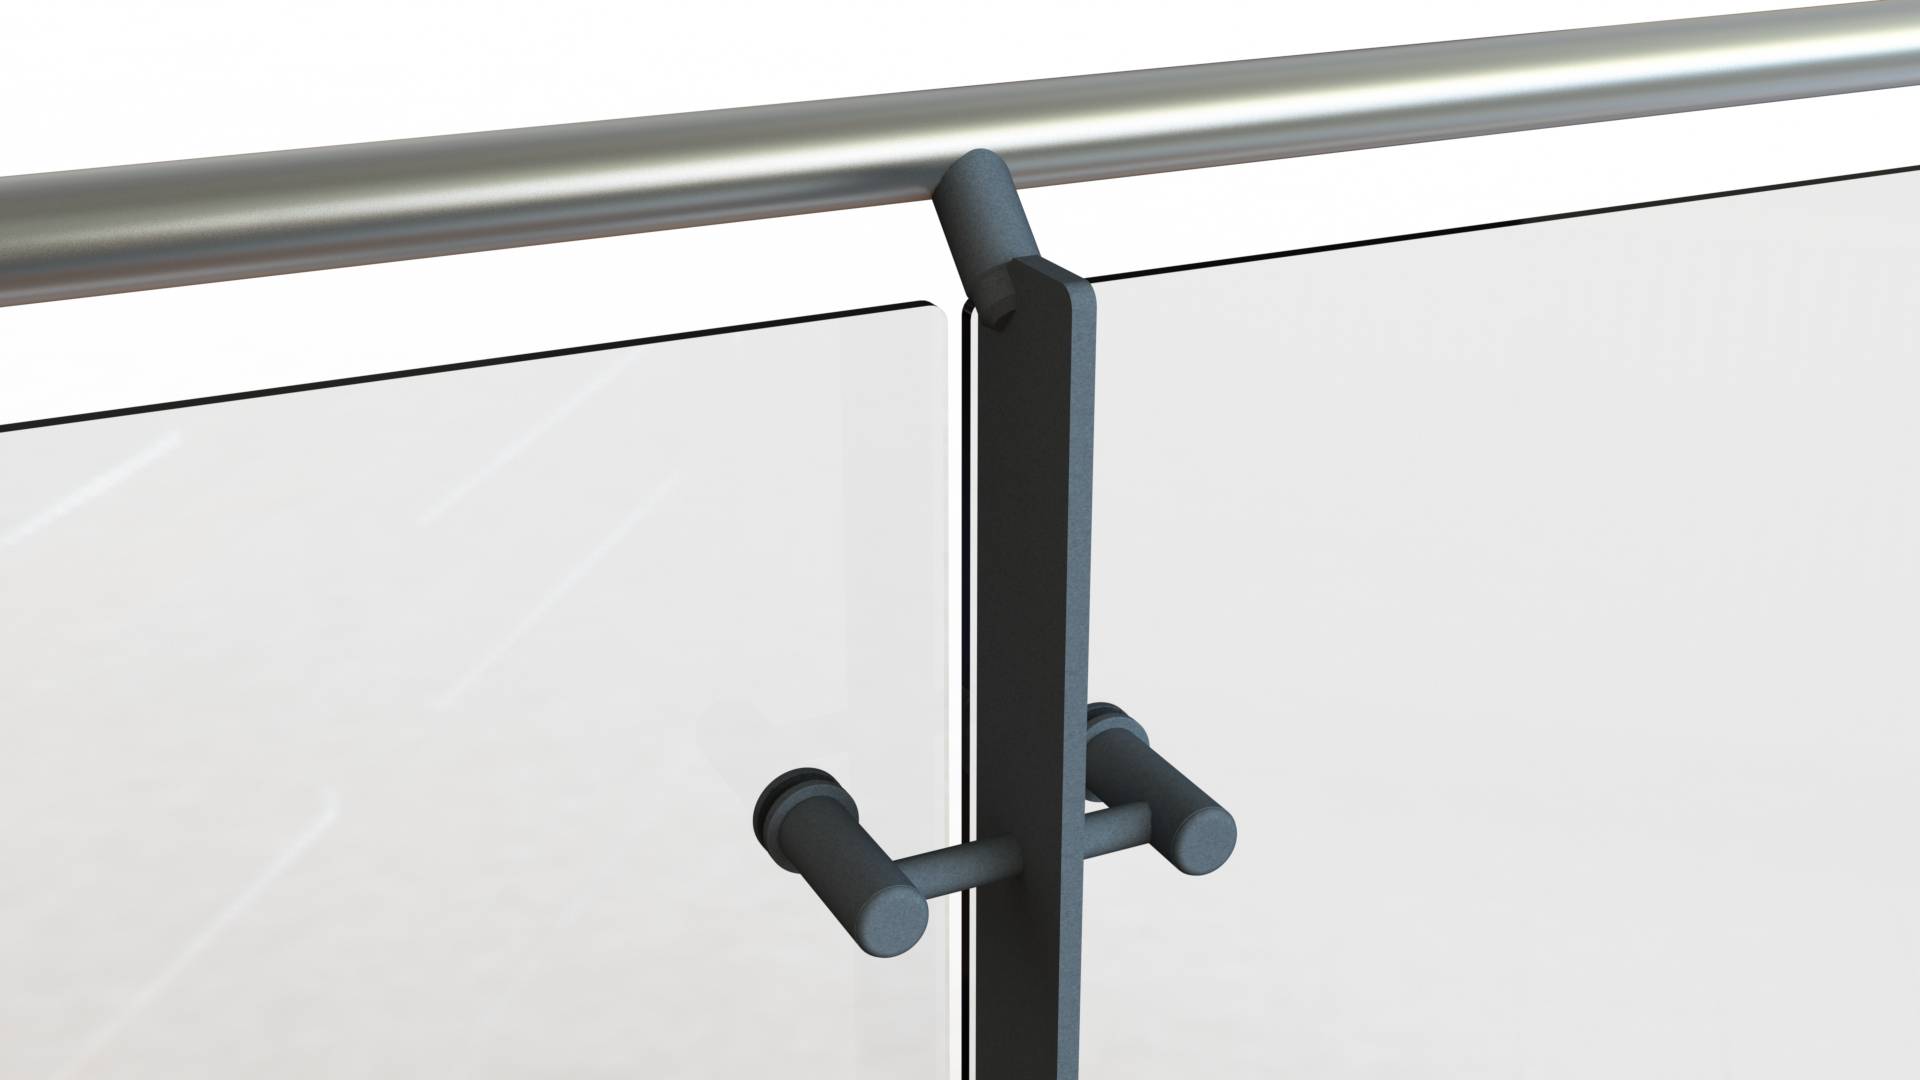 Spectrum® Powder Coated Balustrade With Slim Stanchions